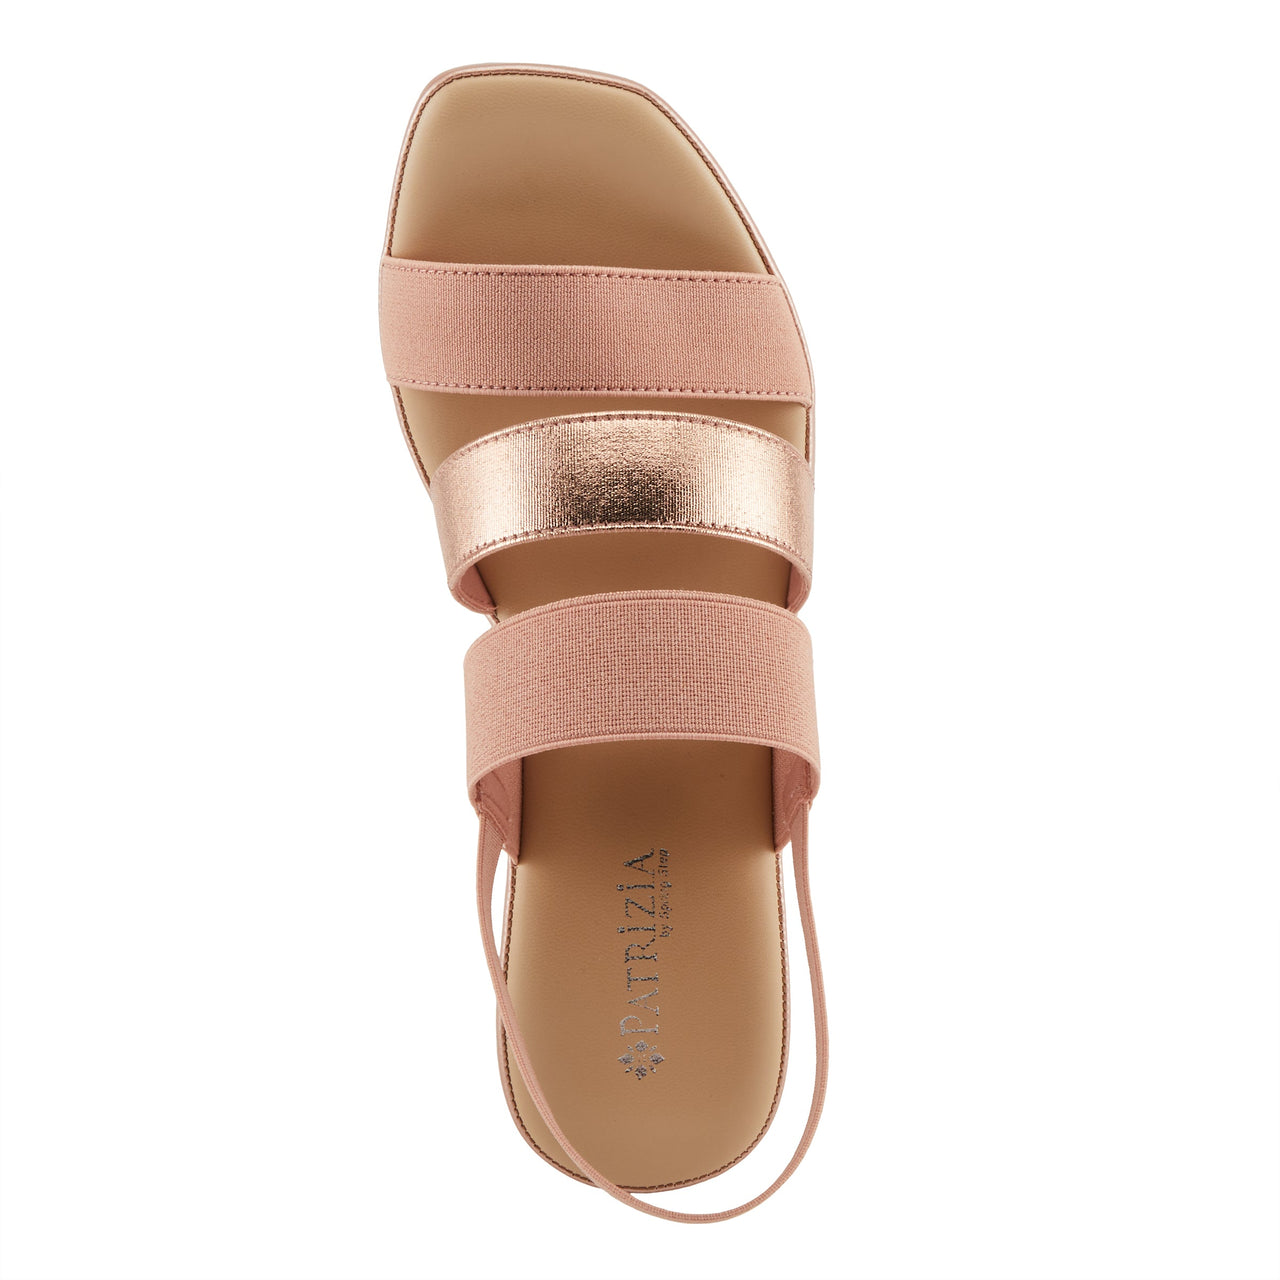 Spring Step Shoes Patrizia Marzula Sandals